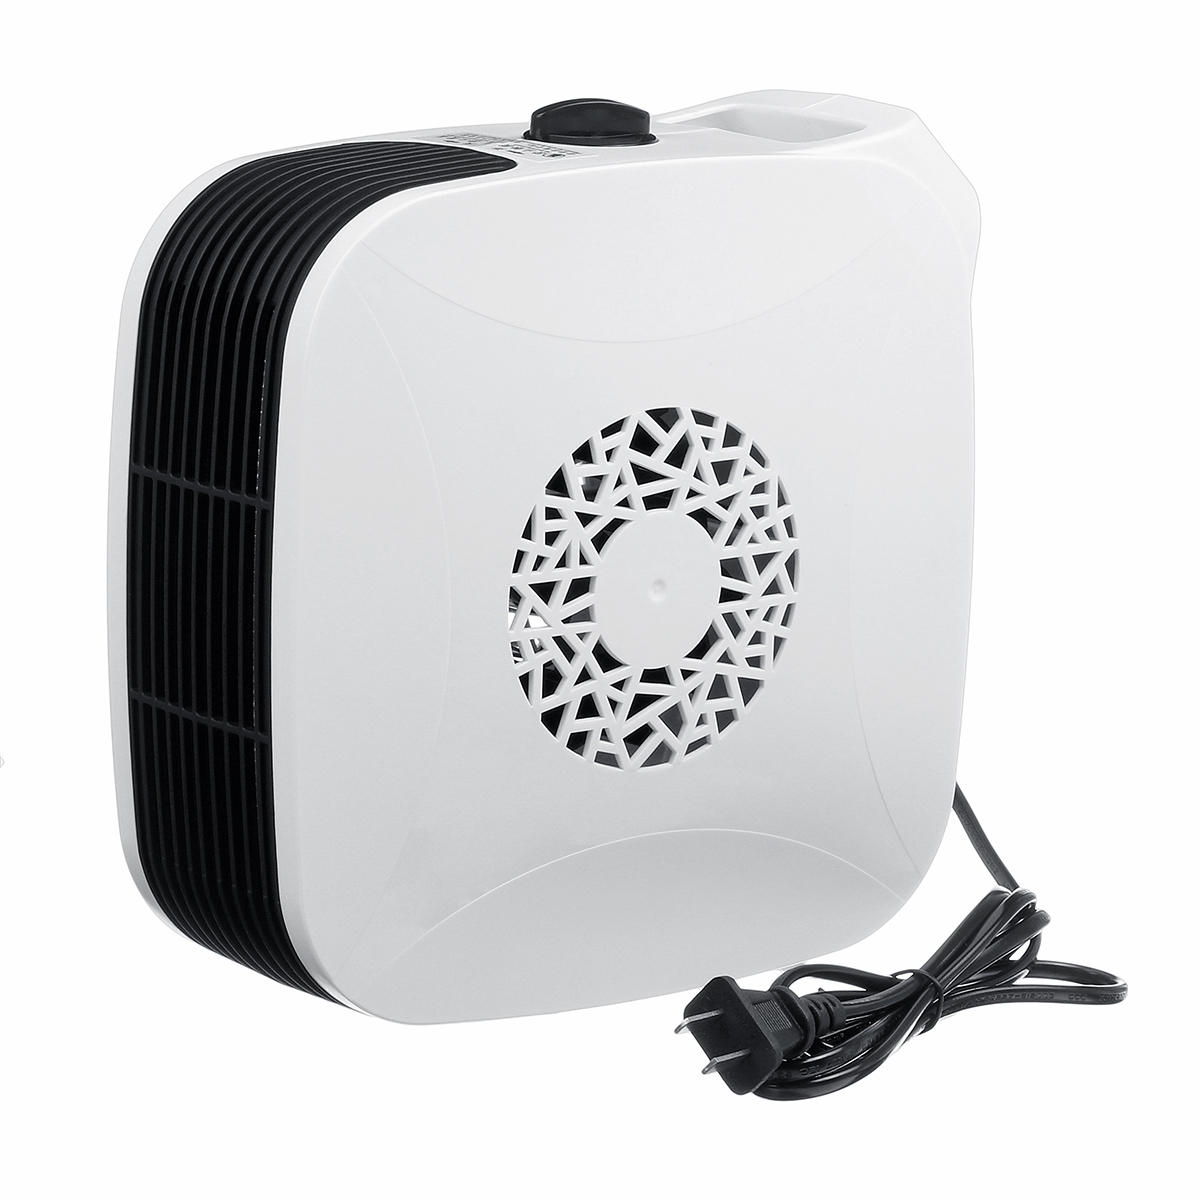 700w Electric Heating Fan Heater Portable Automatic Thermostat Control Winter Air Warmer regarding dimensions 1200 X 1200